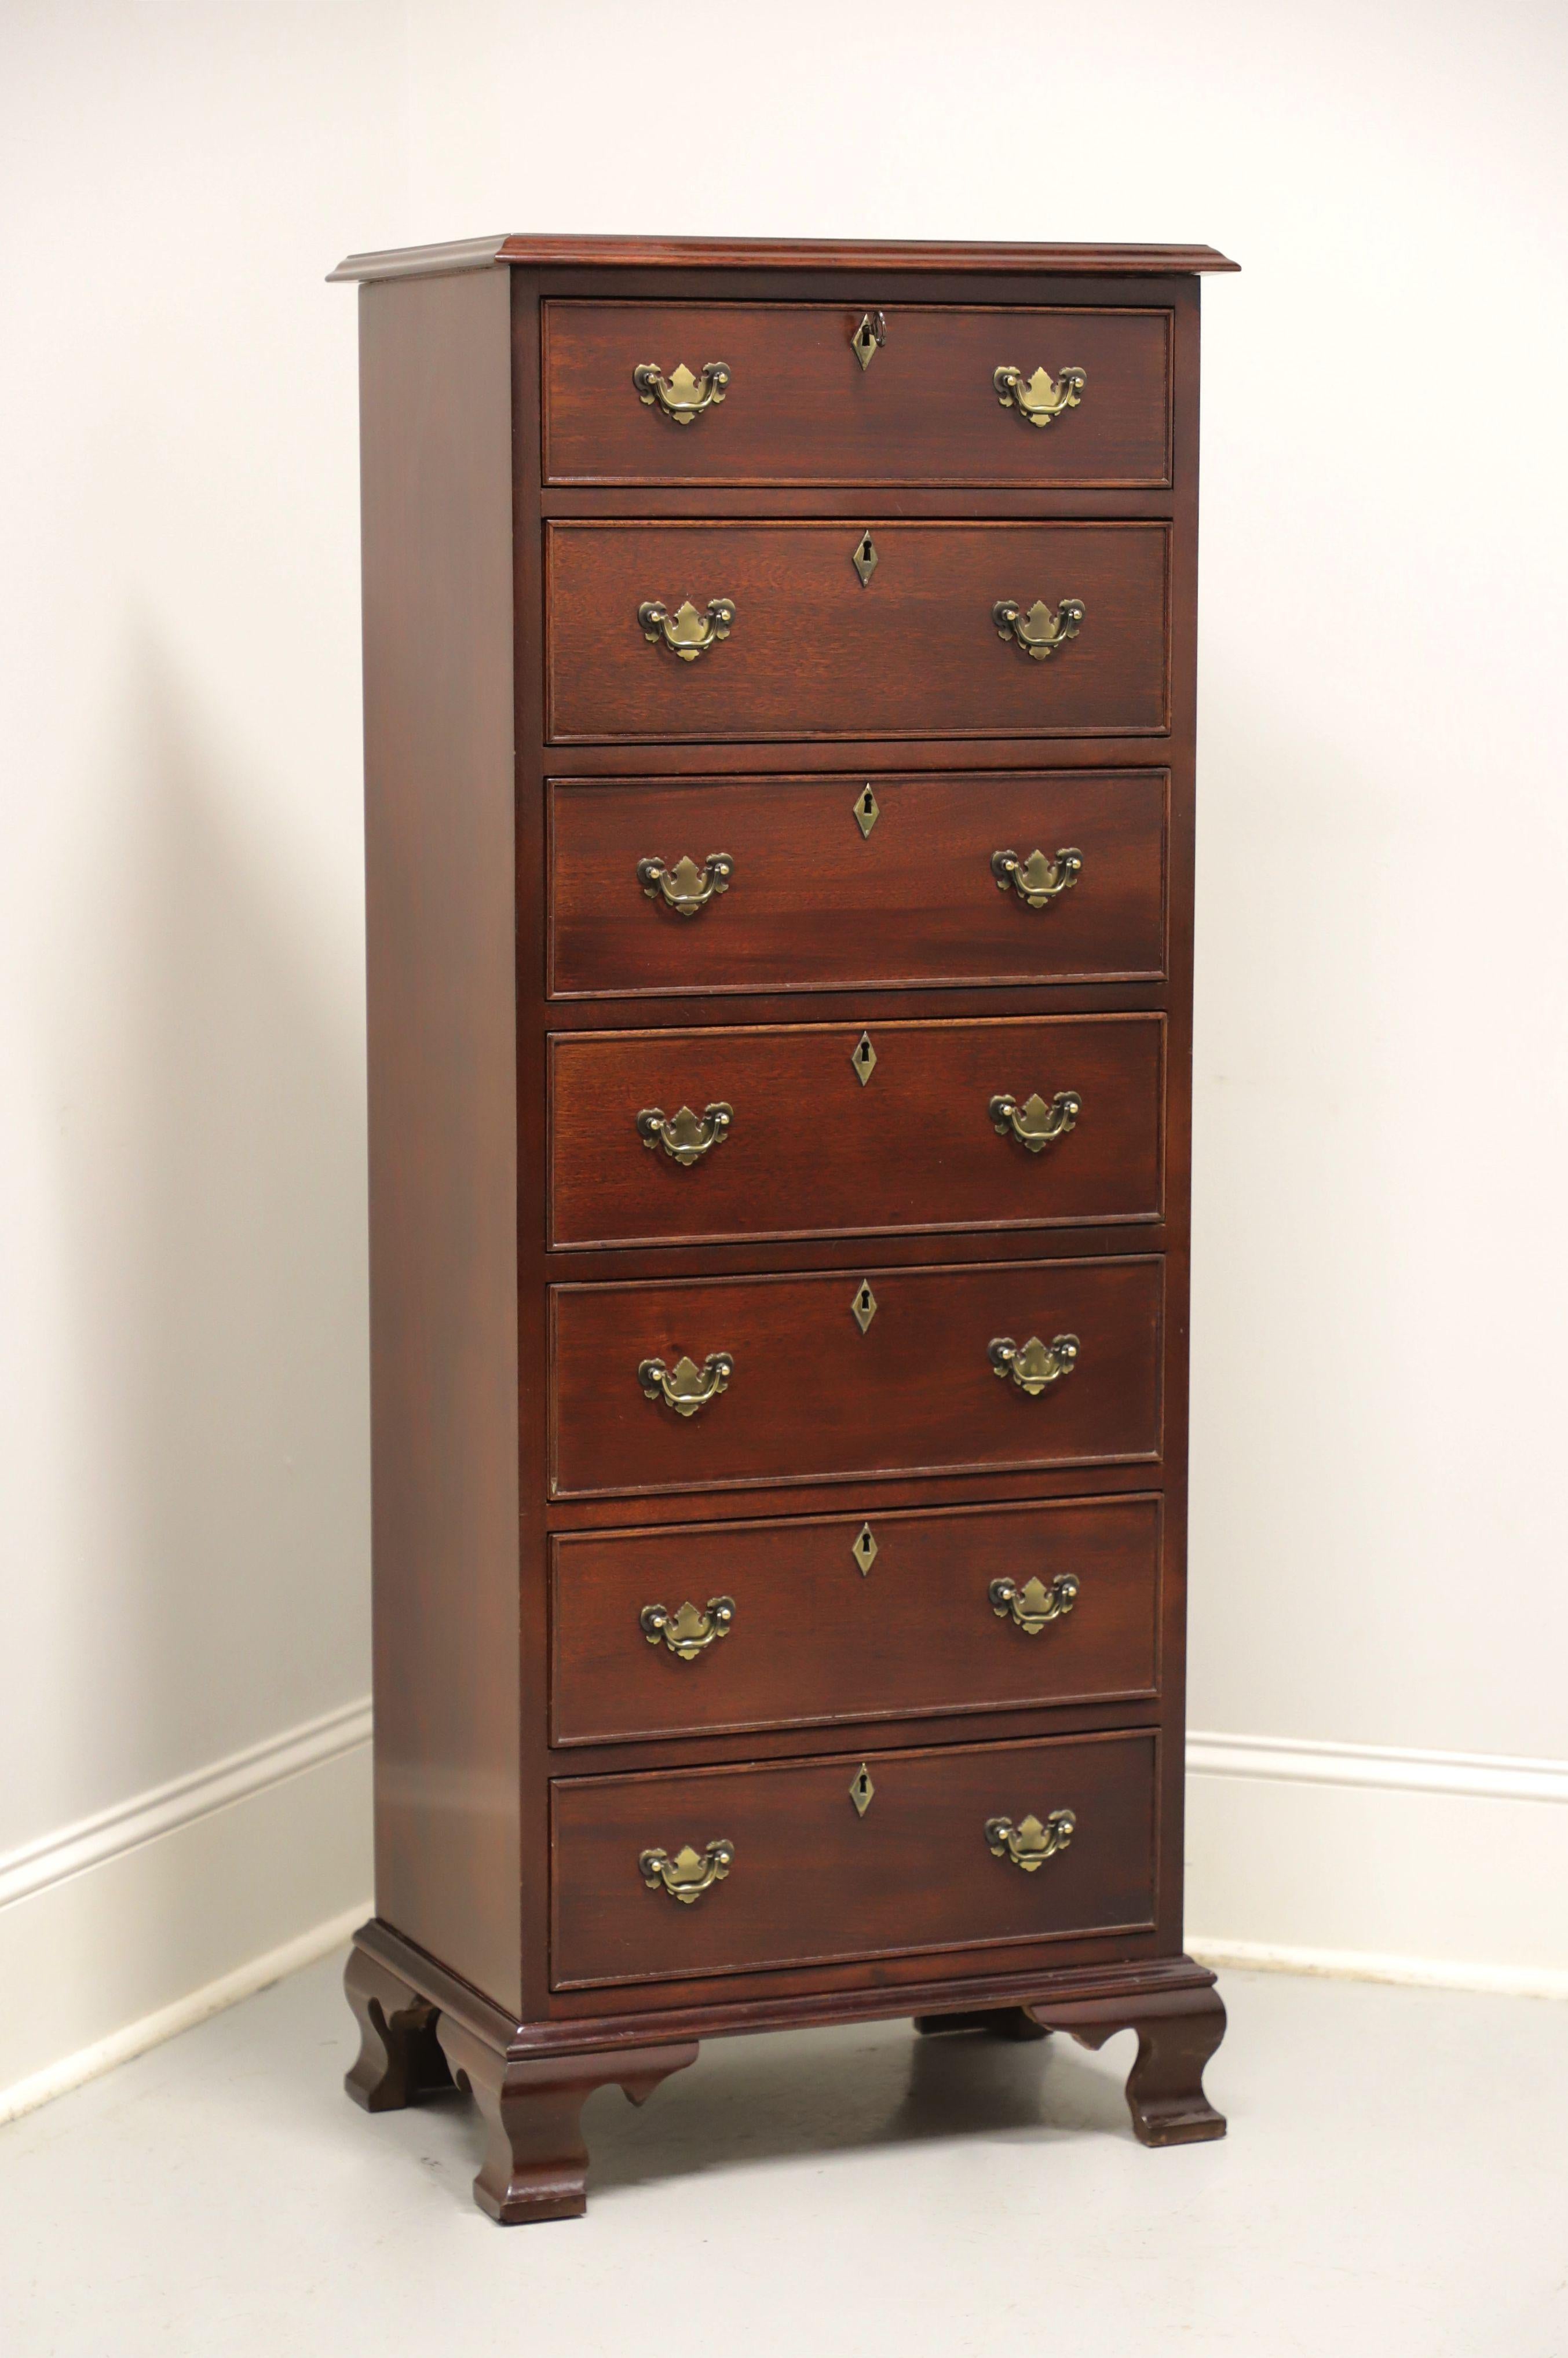 CRAFTIQUE Solid Mahogany Chippendale Semainier Lingerie Chest with Ogee Feet 6